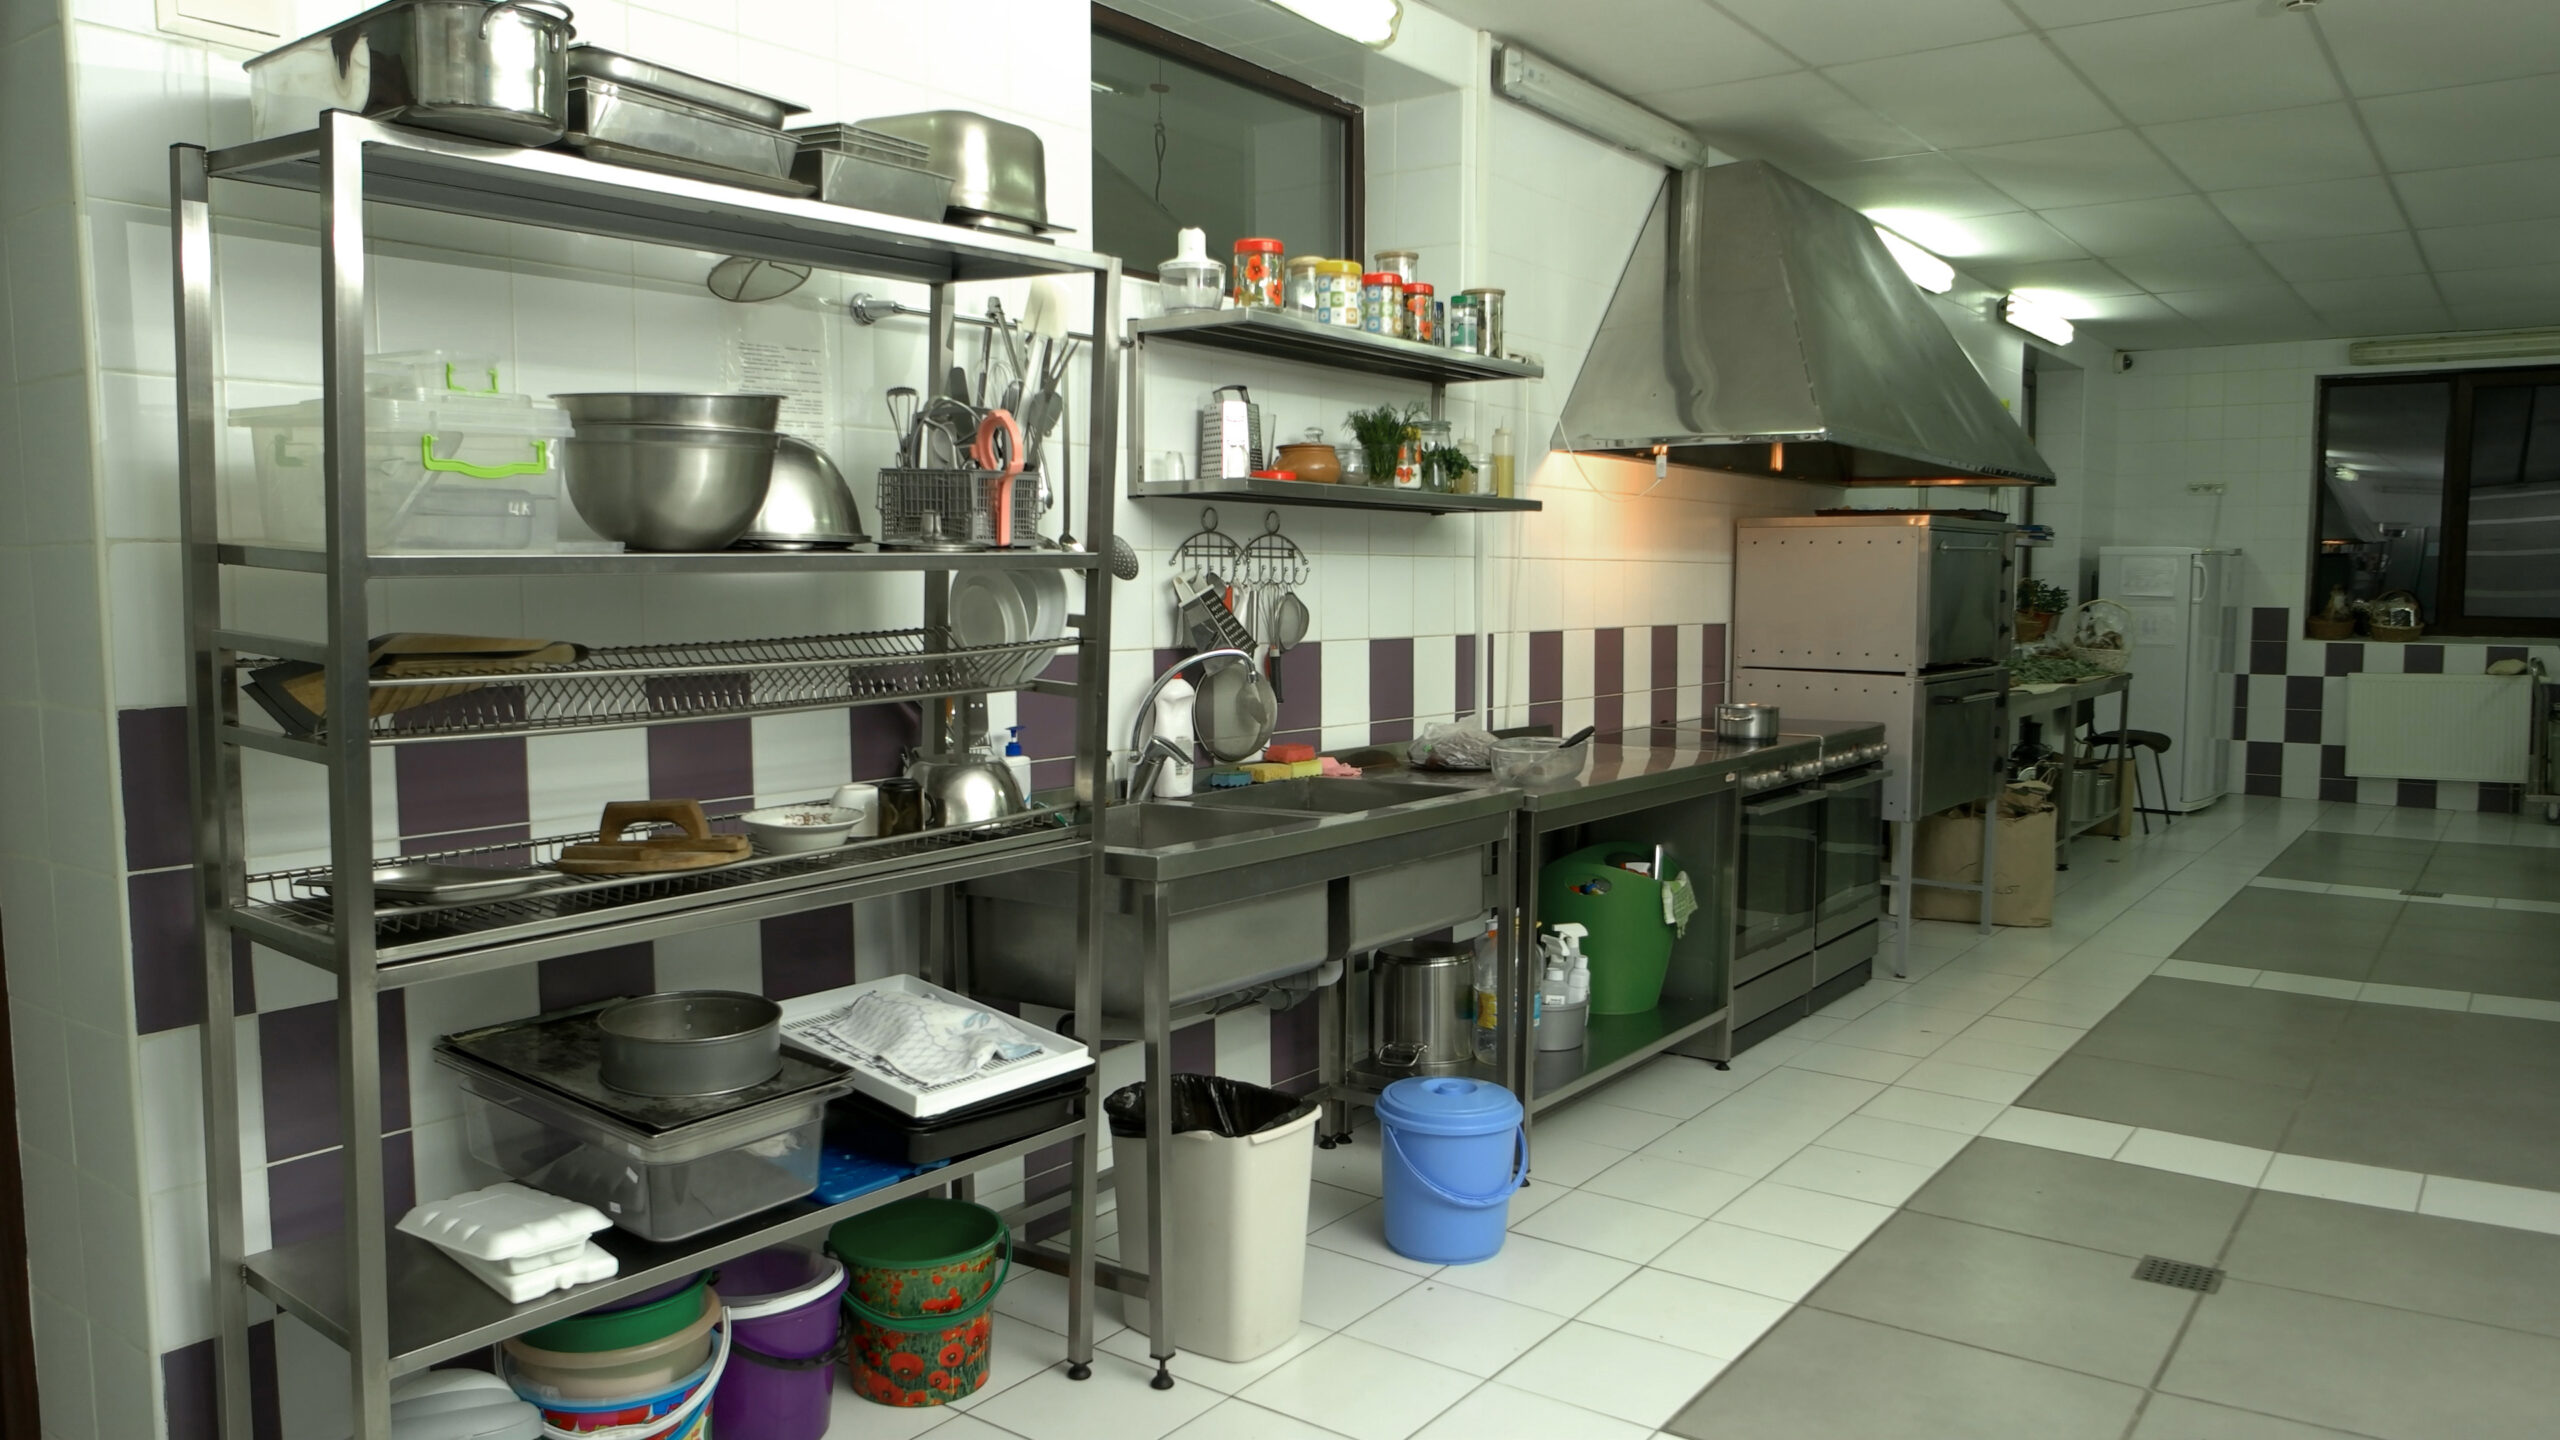 Interior of commercial kitchen with utensils and appliances. Various food ingredients and equipment at industrial kitchen.